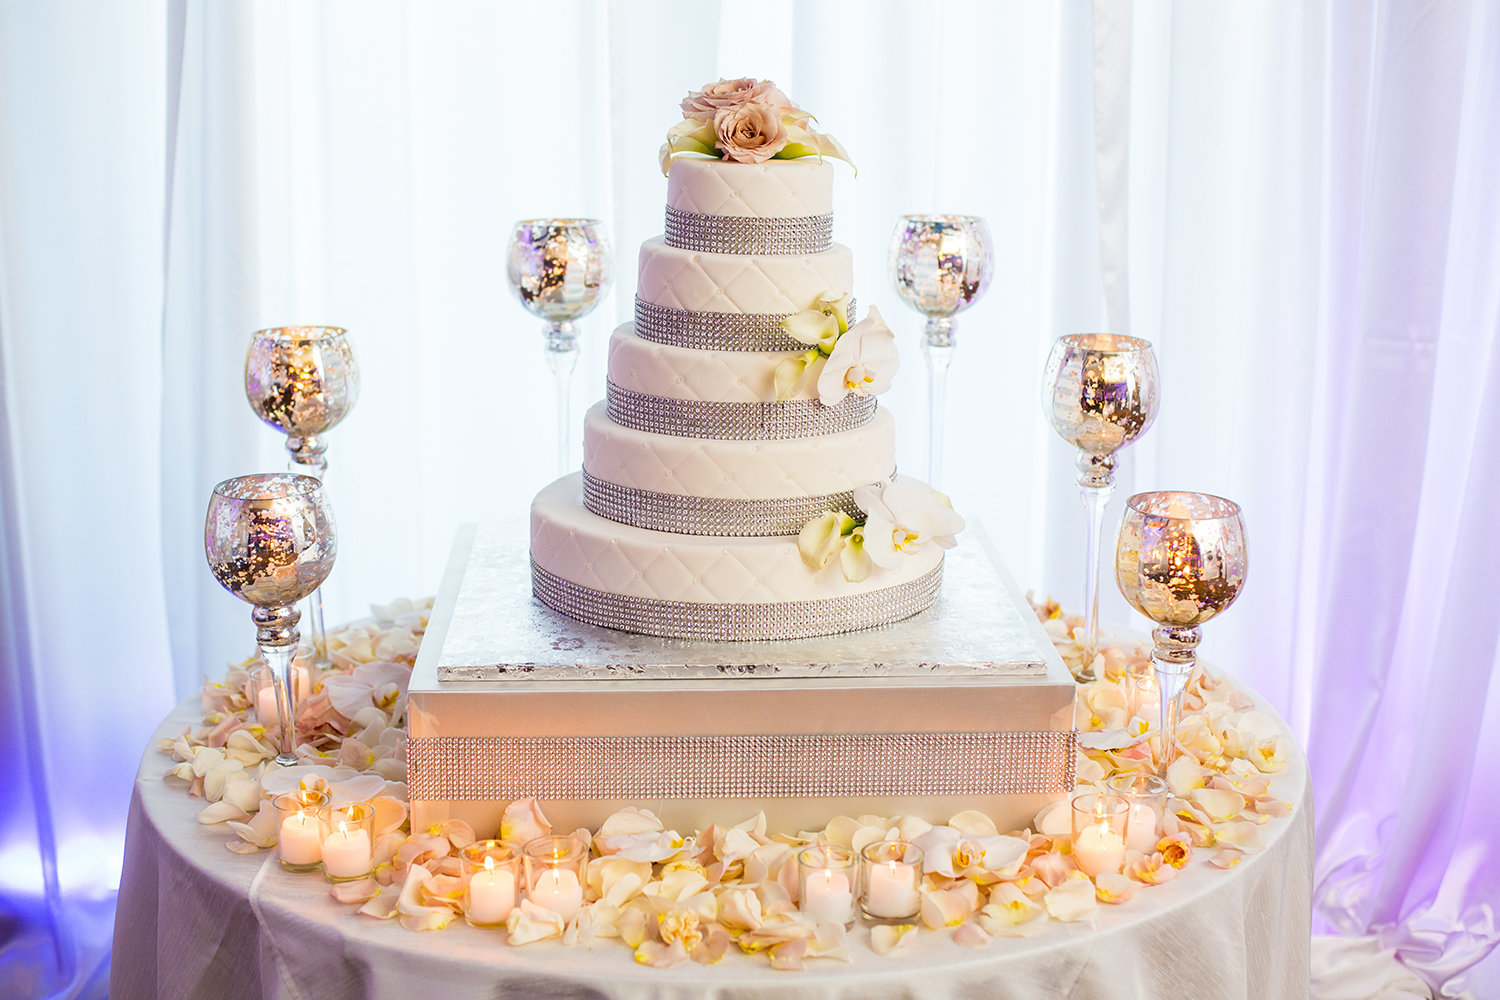 Wedding cake surrounded with candles and adorned with rose petals